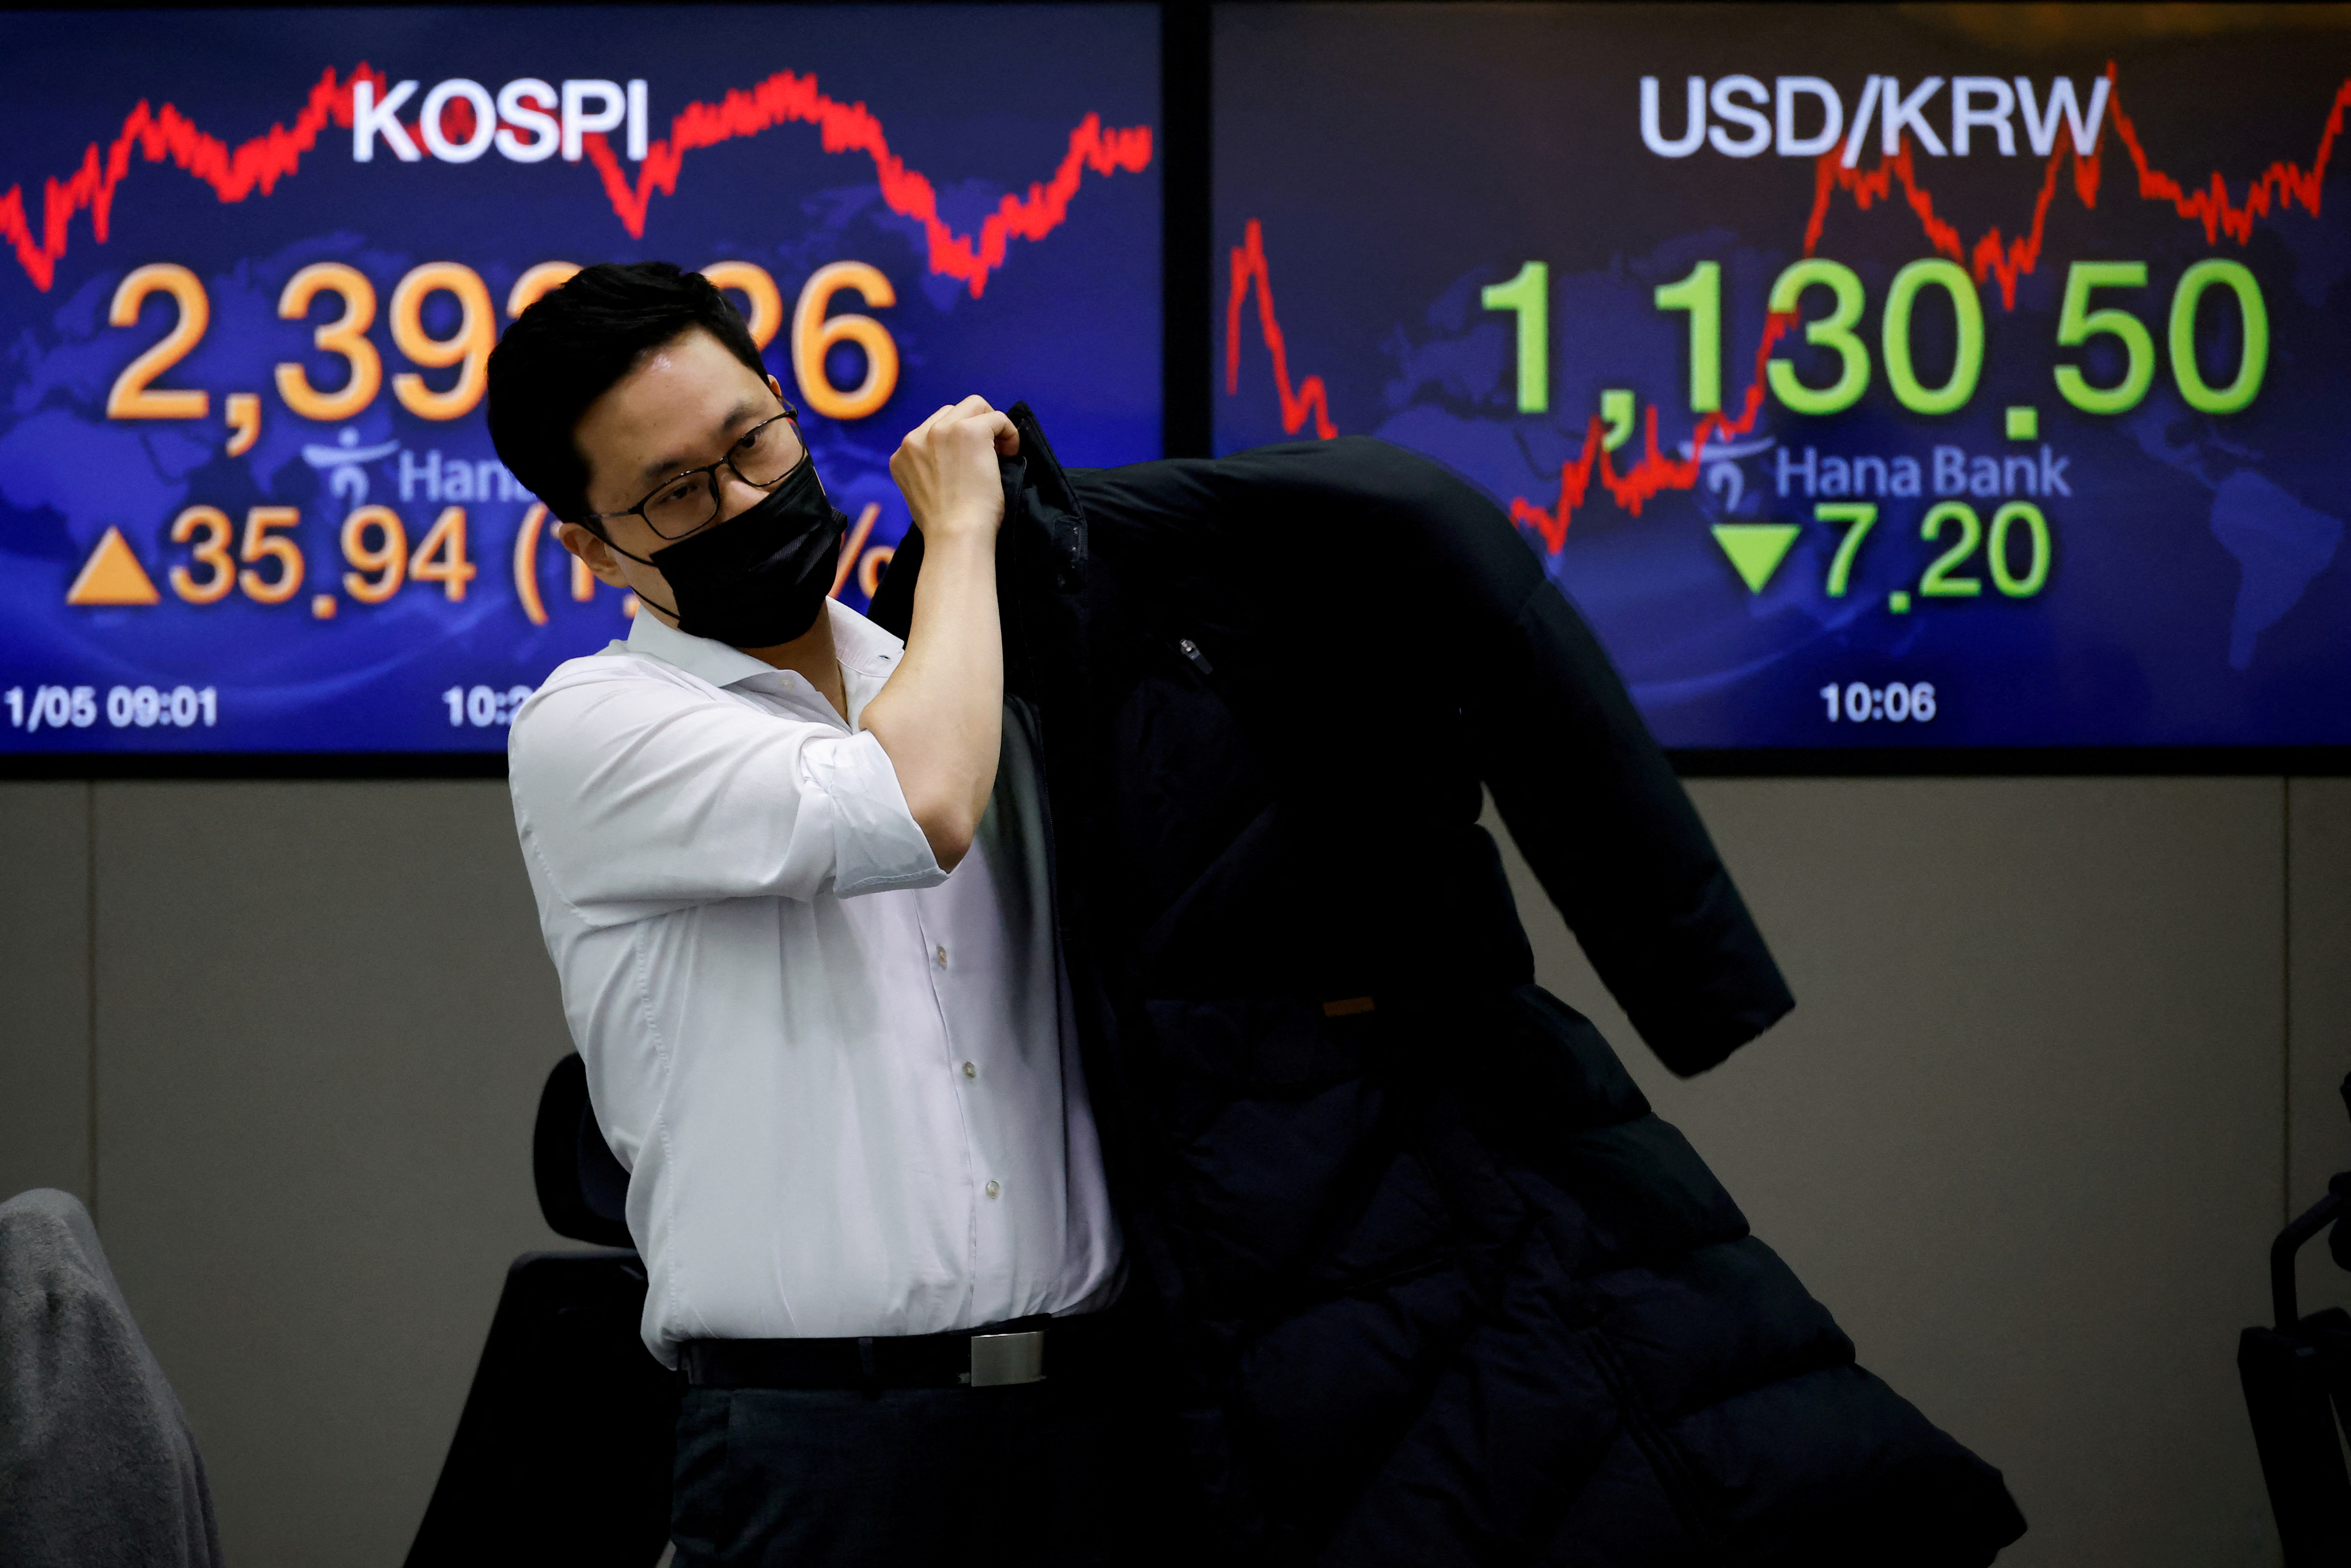 A currency dealer walks past electronic boards showing the Korea Composite Stock Price Index (KOSPI) and the exchange rate between the U.S. dollar and South Korean won at a dealing room of a bank, in Seoul